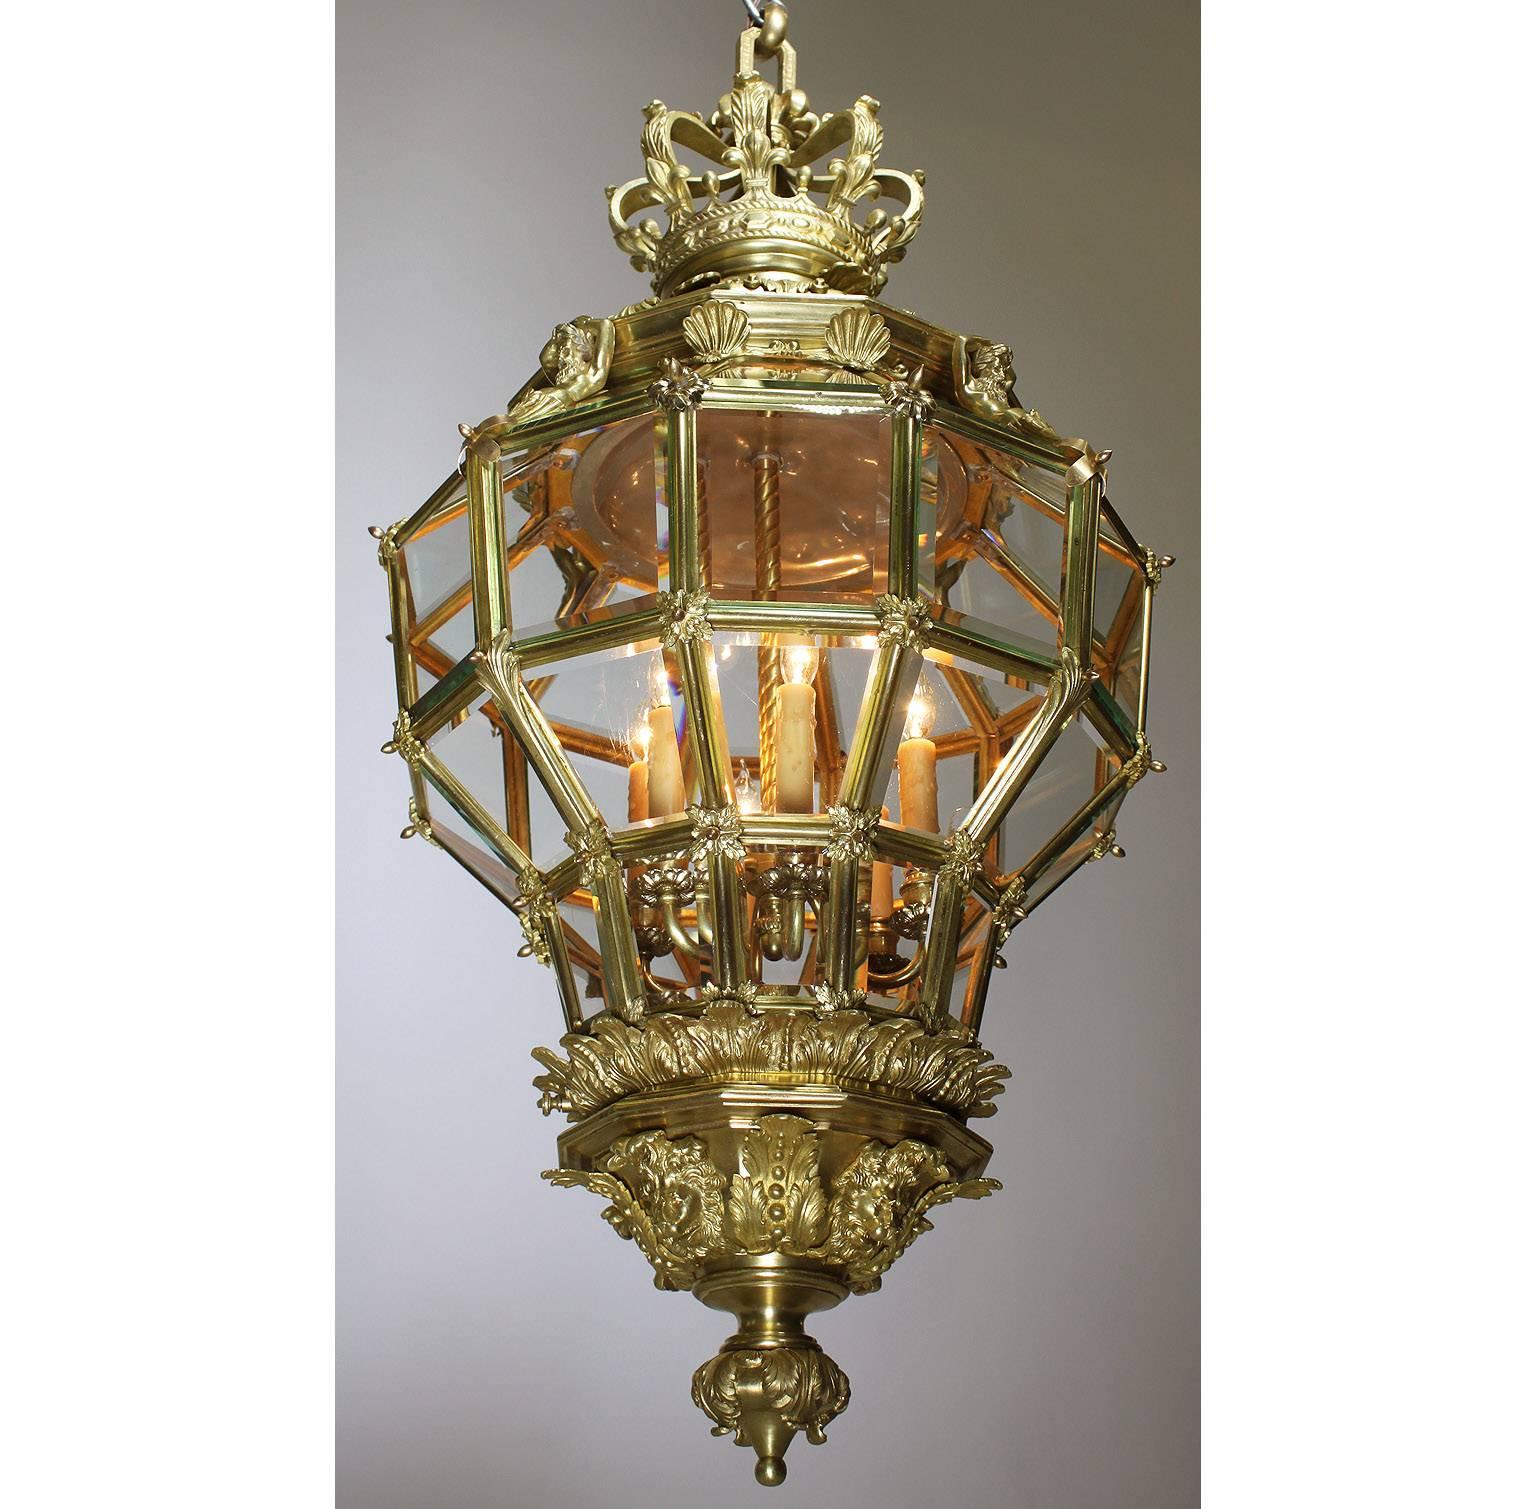 A Large and Palatial French 19th century Louis XIV style gilt bronze and panelled bevelled glass 